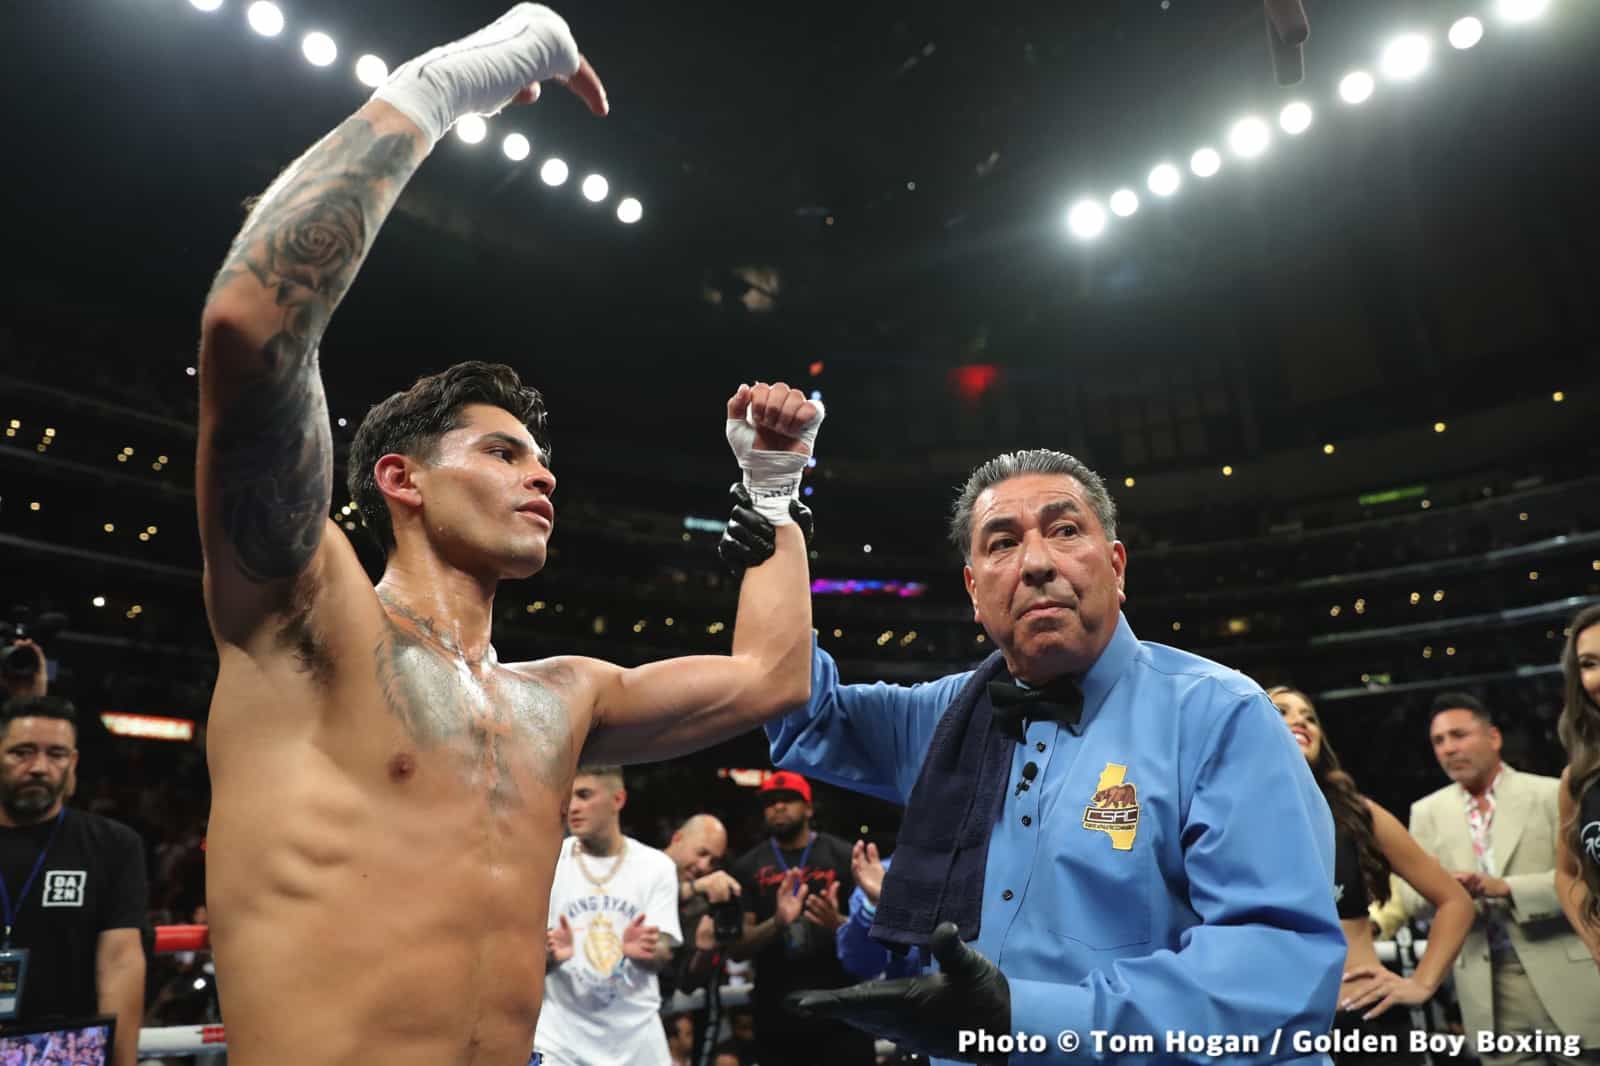 Image: Ryan Garcia tells Mayweather he'll fight Tank "any weight, any time, any place"